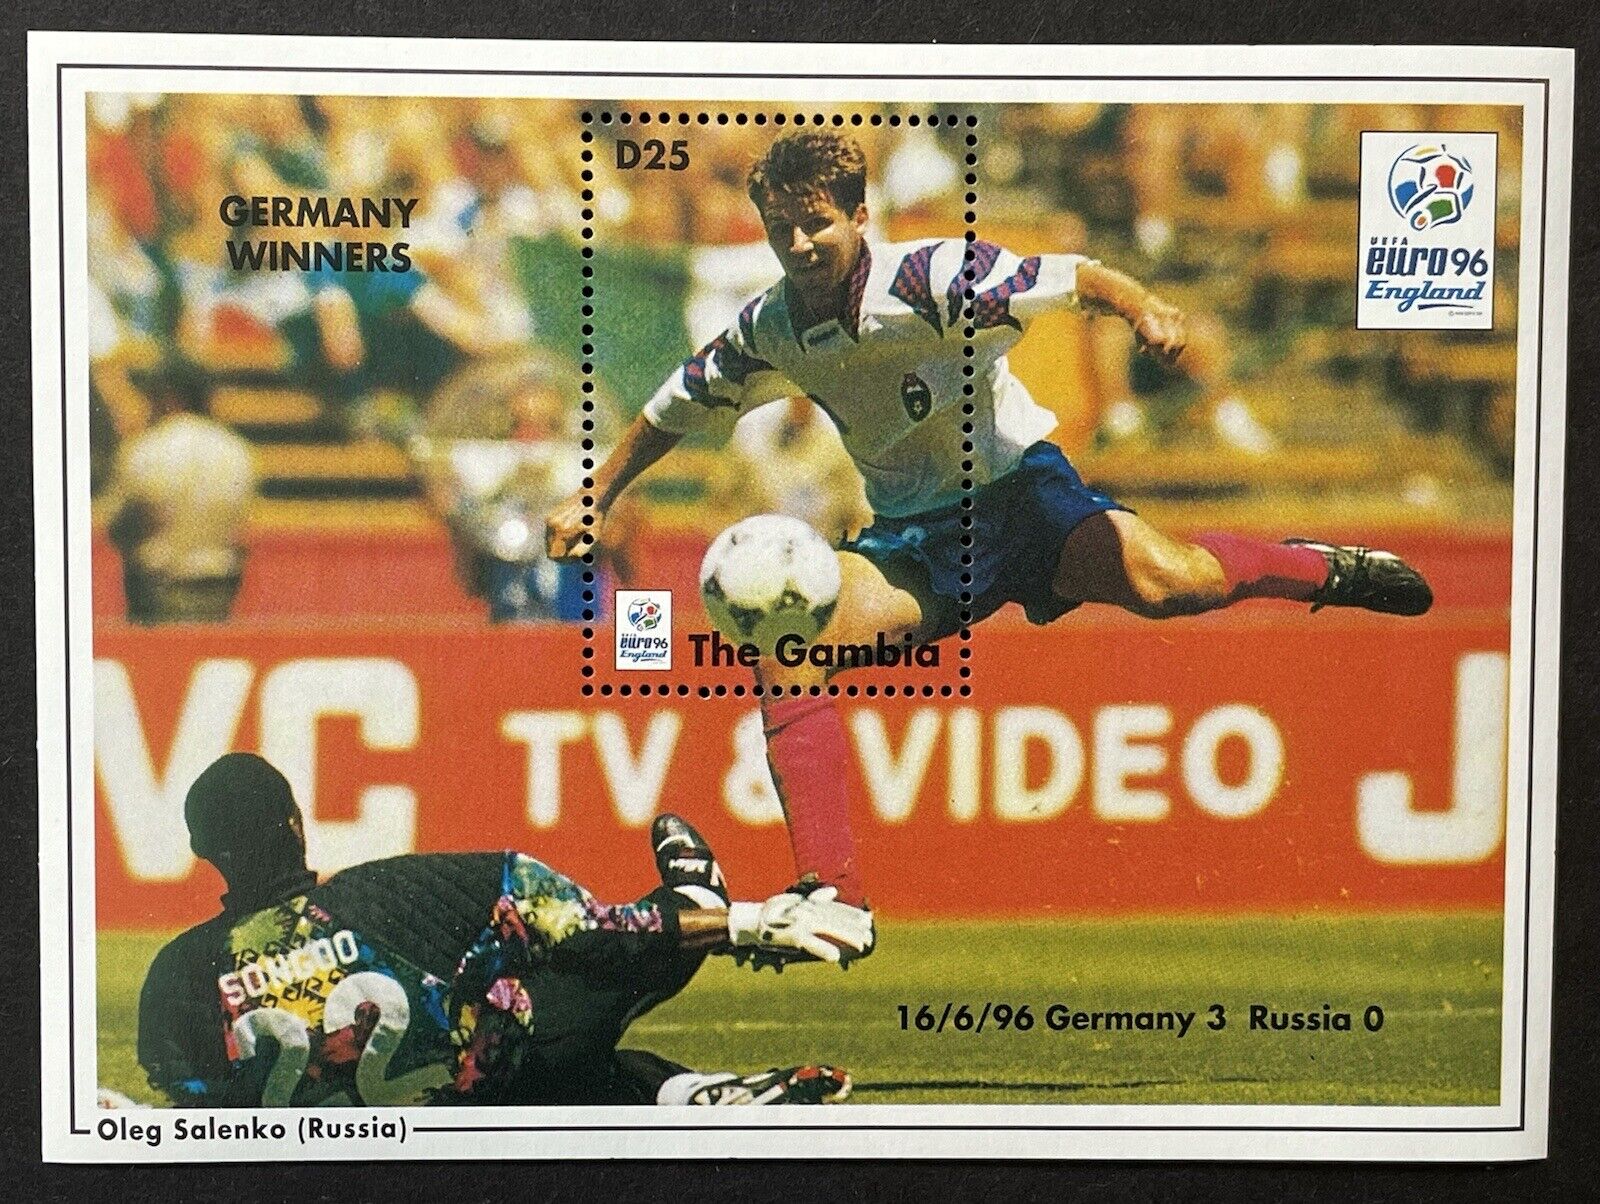 GAMBIA '96 EUROPEN SOCCER CHAMPIONSHIPS ENGLAND STAMPS SS 1996 M